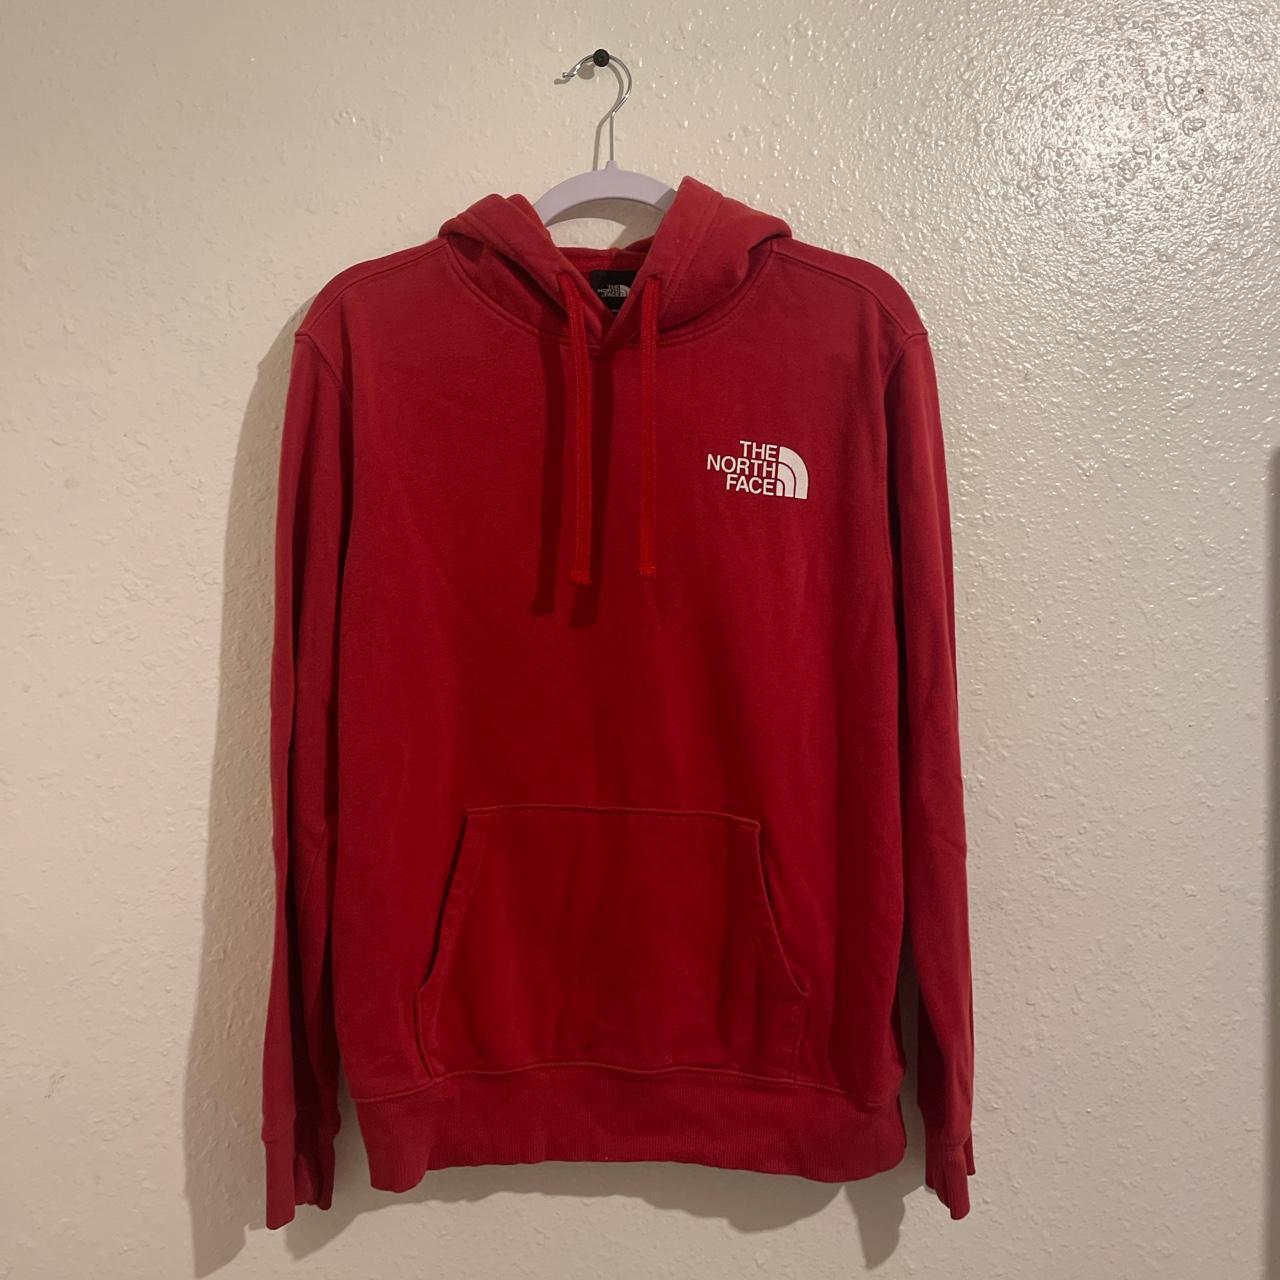 The North Face Men's Red and Black Hoodie